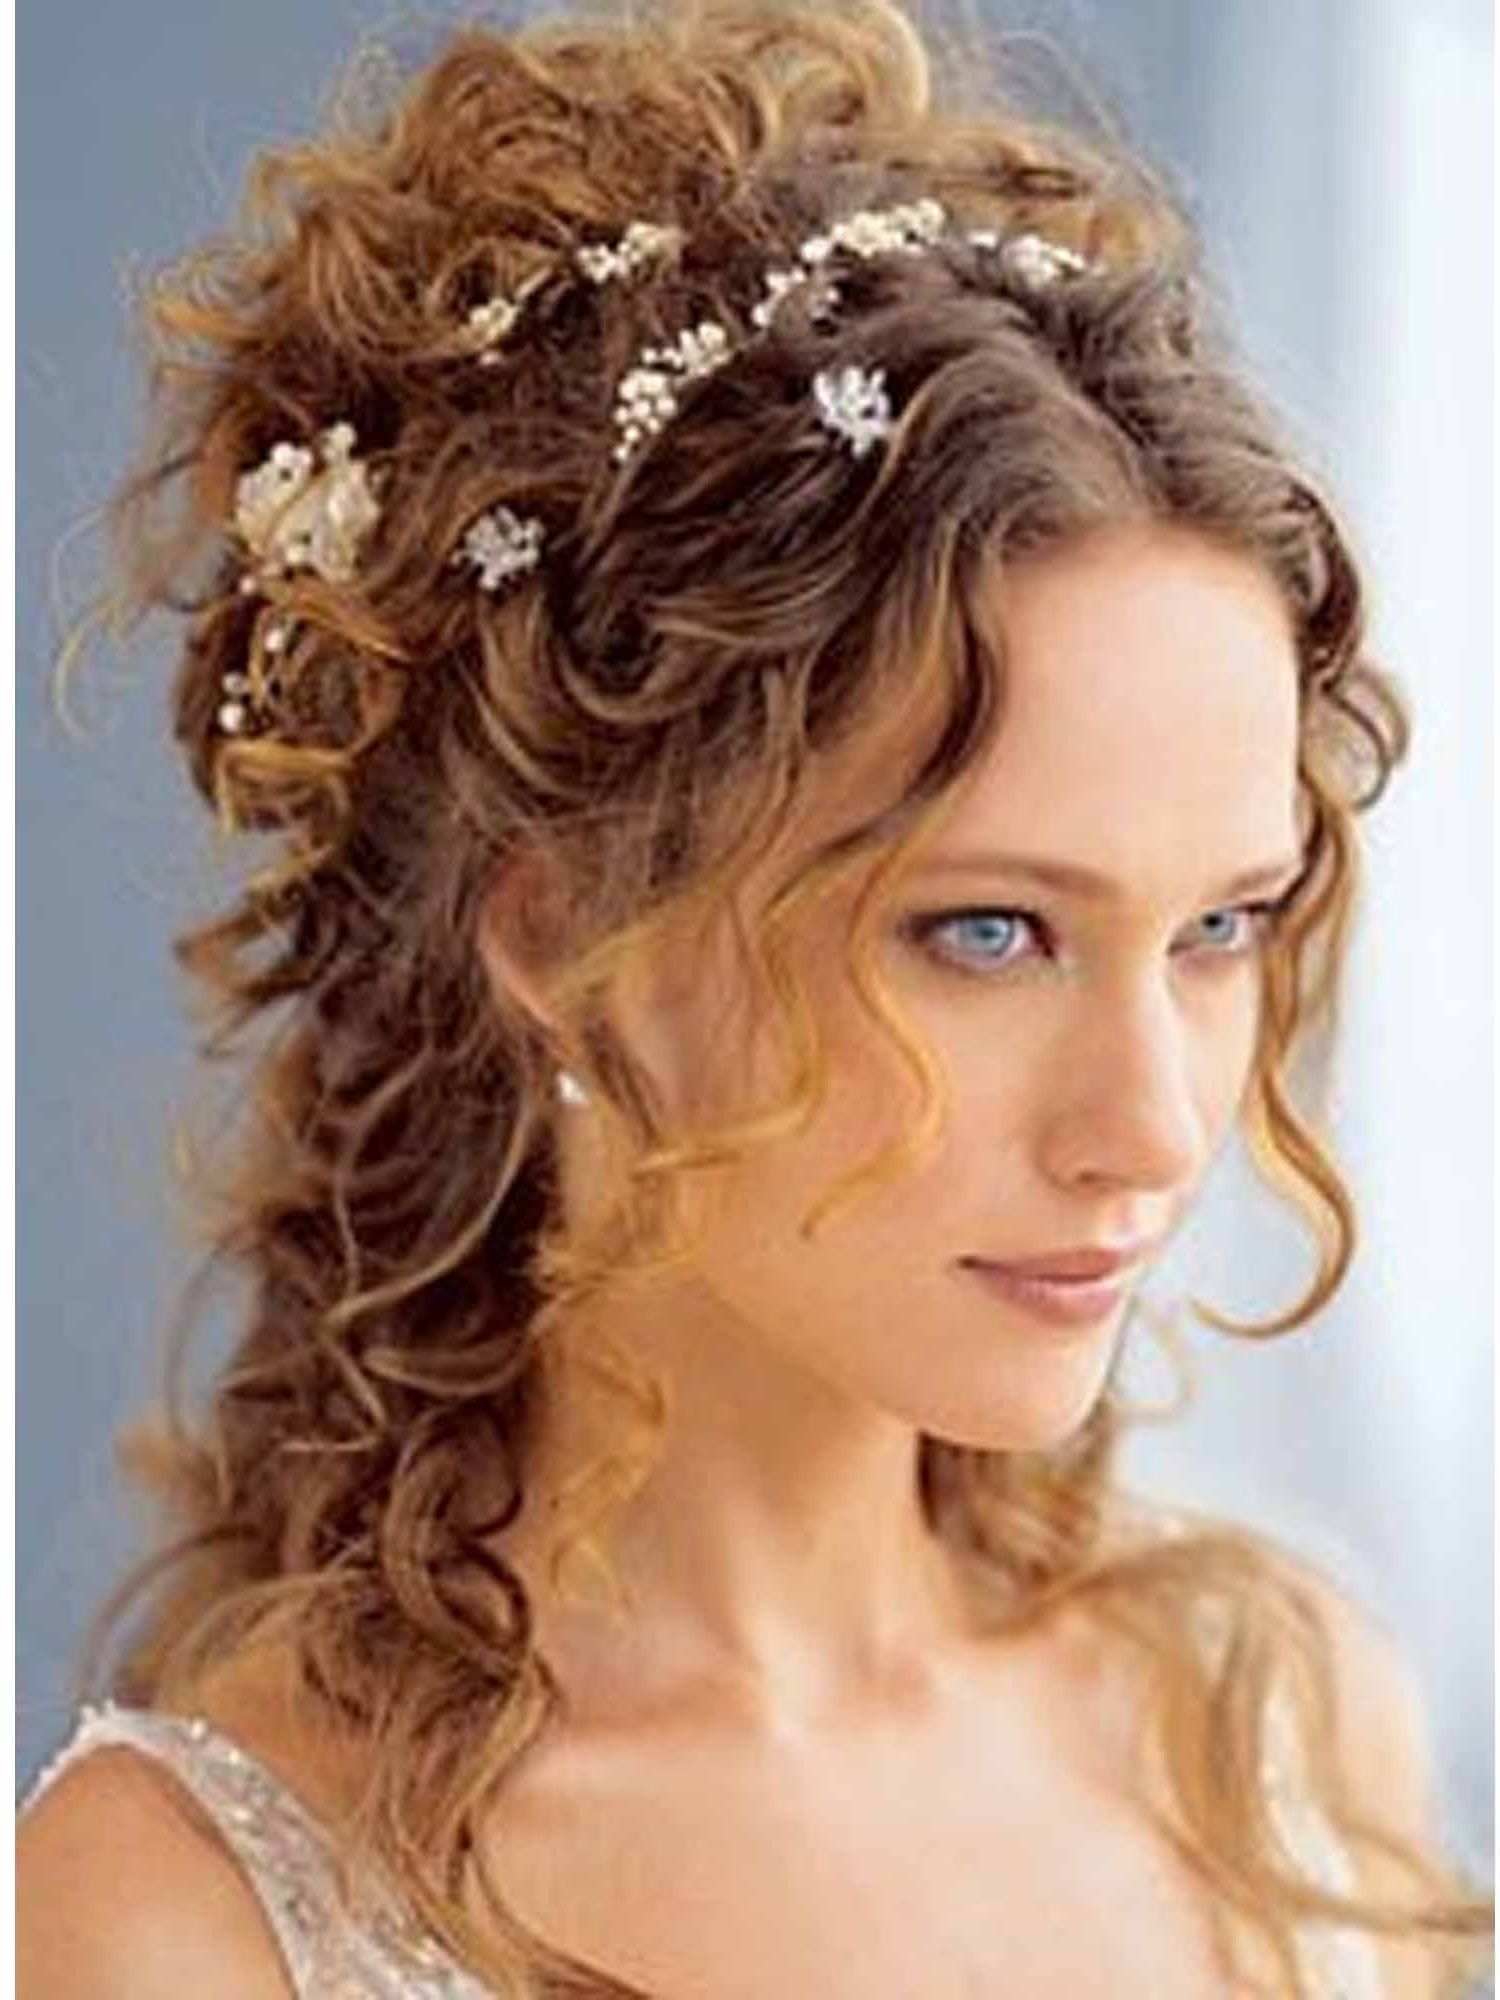 Captivating Long Curly Hair Wedding Hairstyles About Updo Hairstyles Throughout Popular Wedding Updos For Long Curly Hair (View 10 of 15)